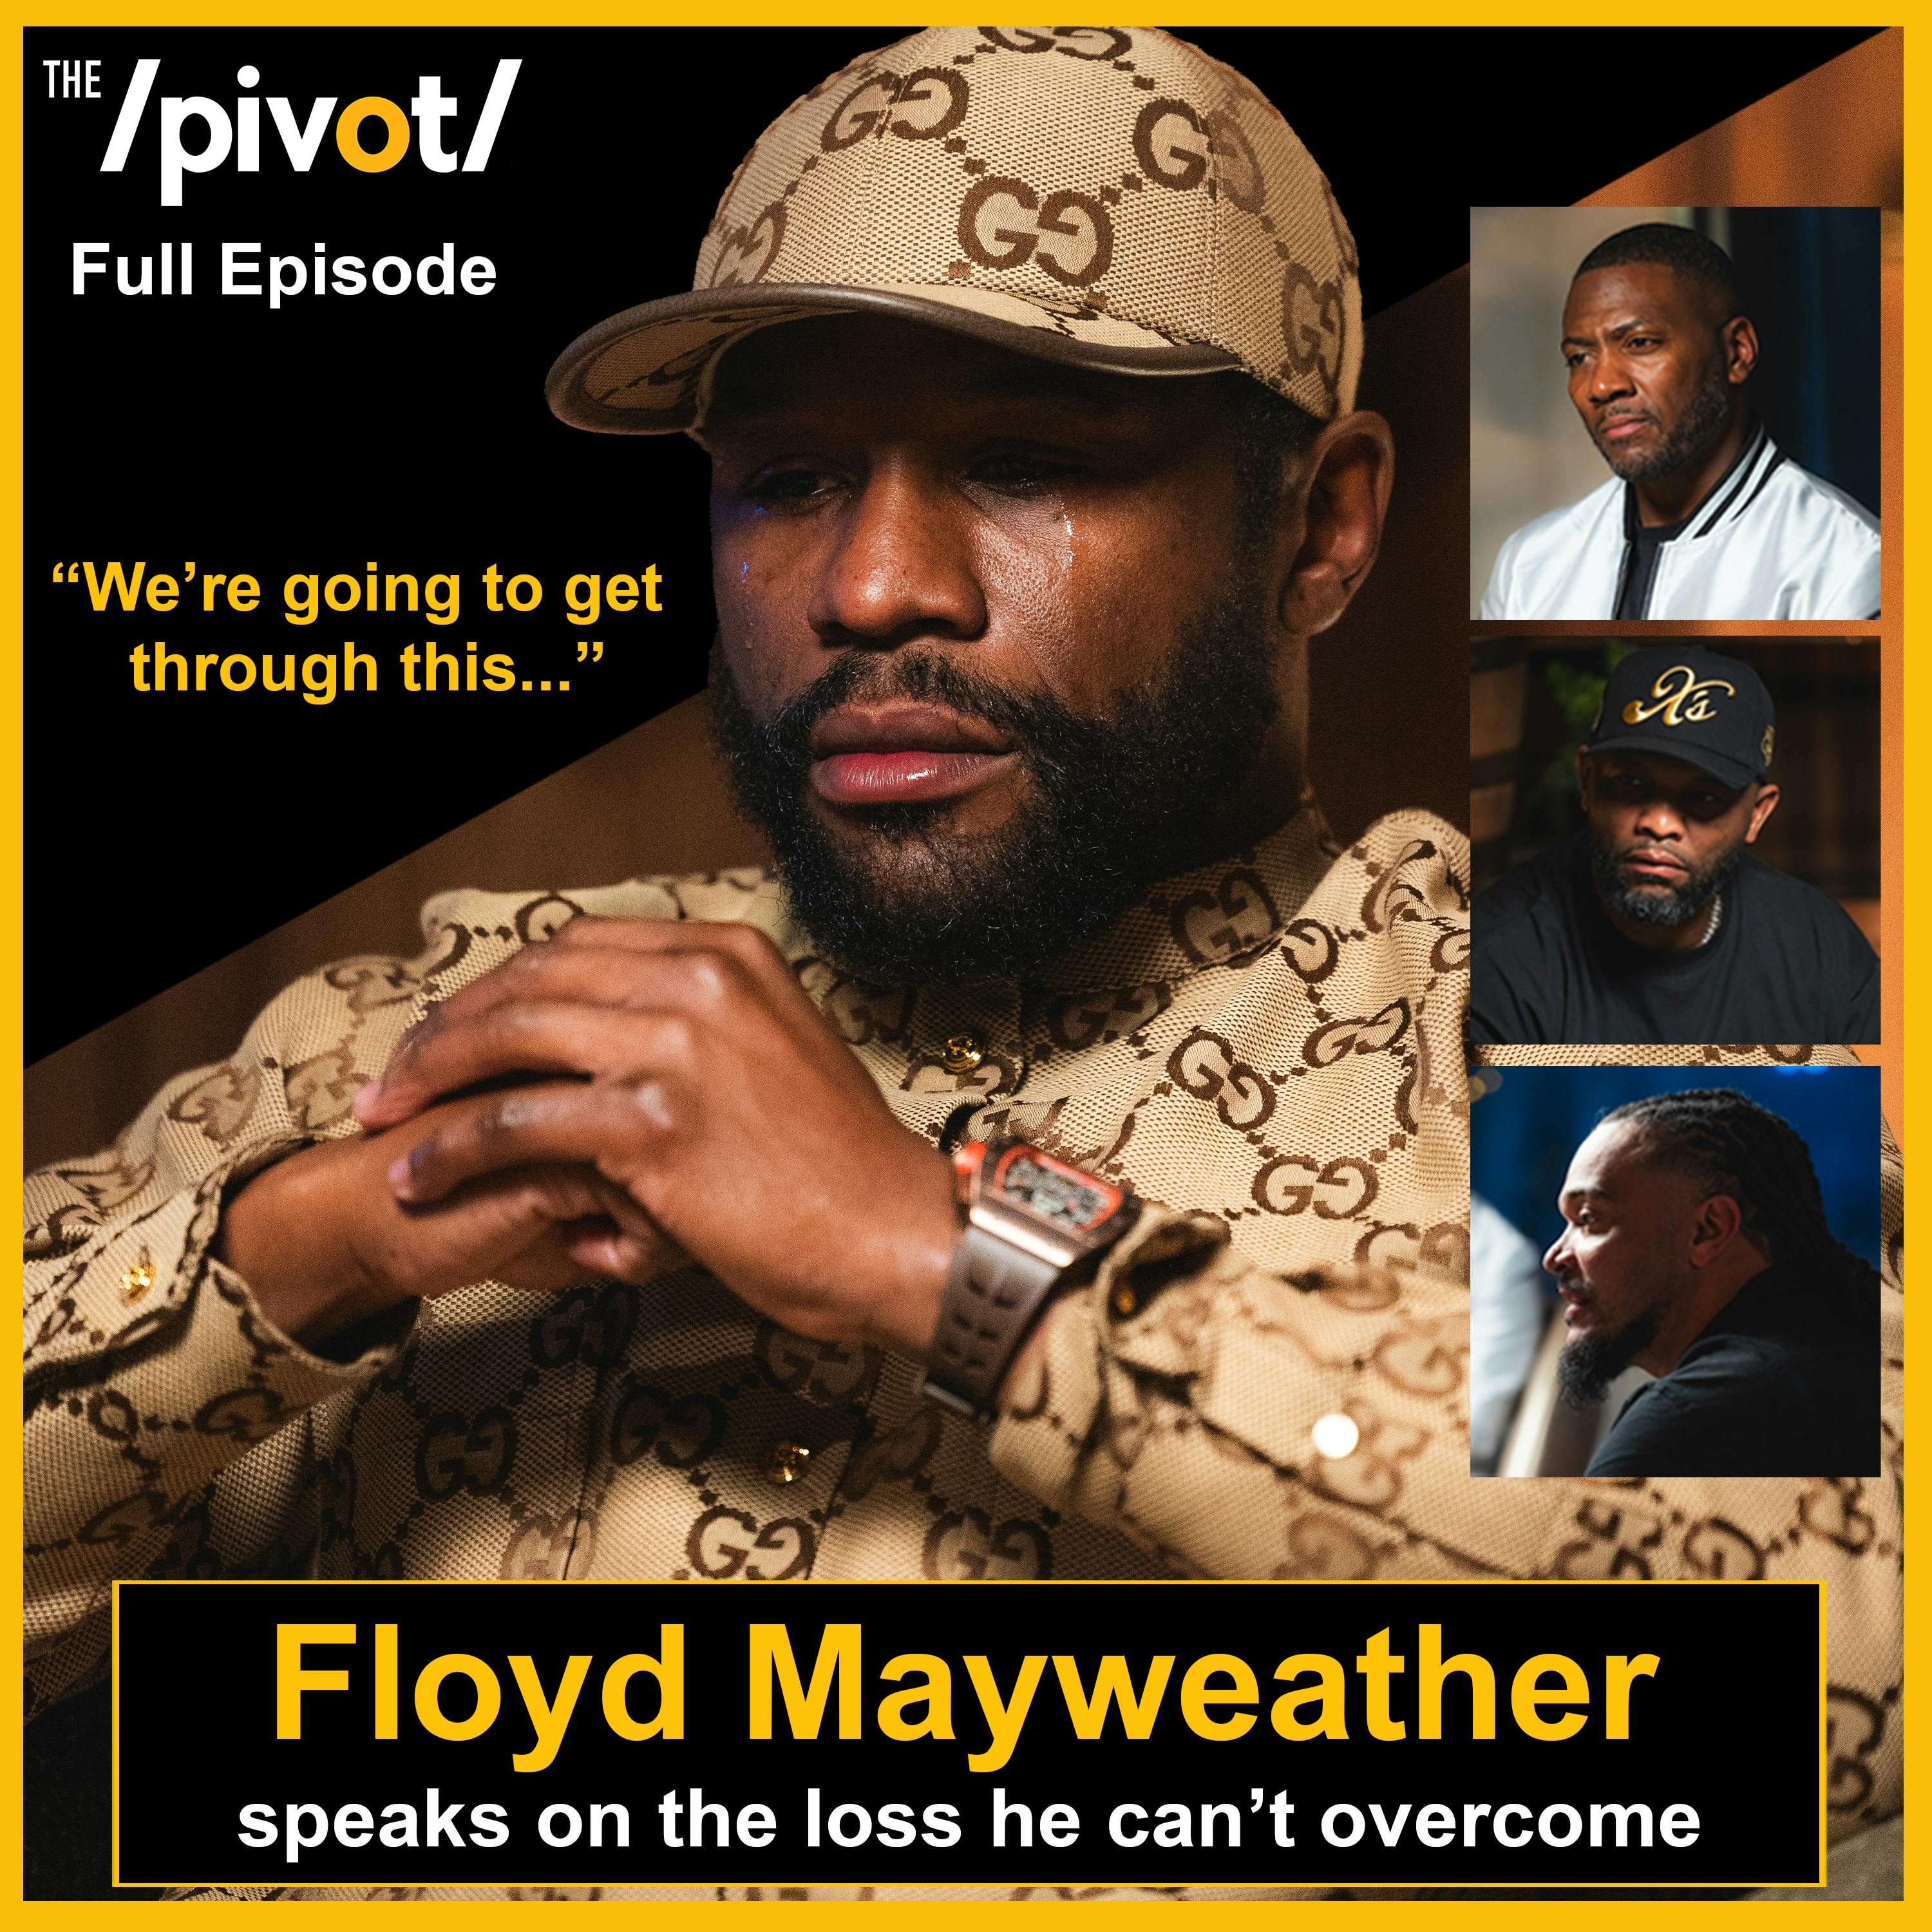 Floyd Mayweather the undefeated boxing champion talks about a loss he hasn’t recovered from, importance of family, relationship with NBA Young Boy, Vegas being a sports mecca, and weighing in on the t